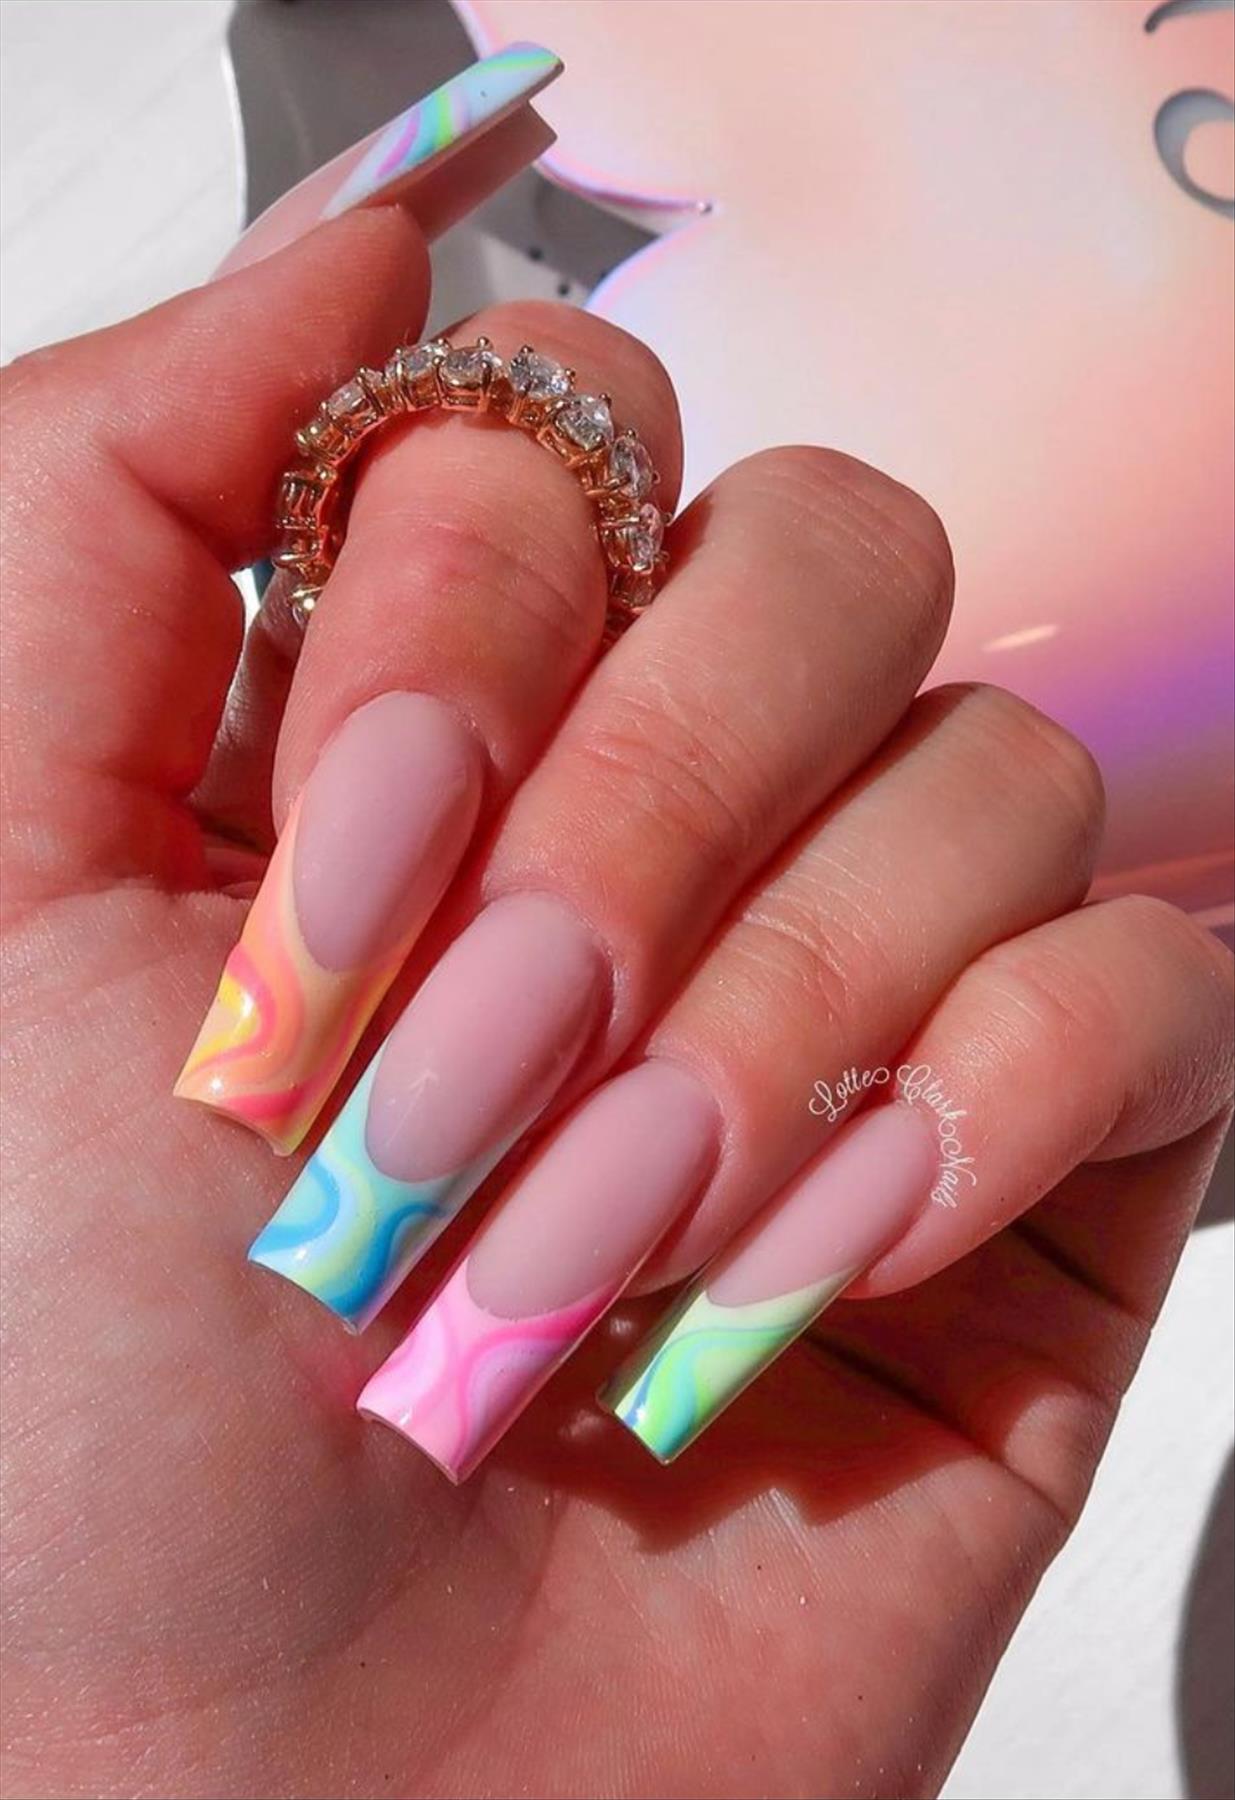 French Pink Tip Nails & Pink Nails For Your Next Manicure